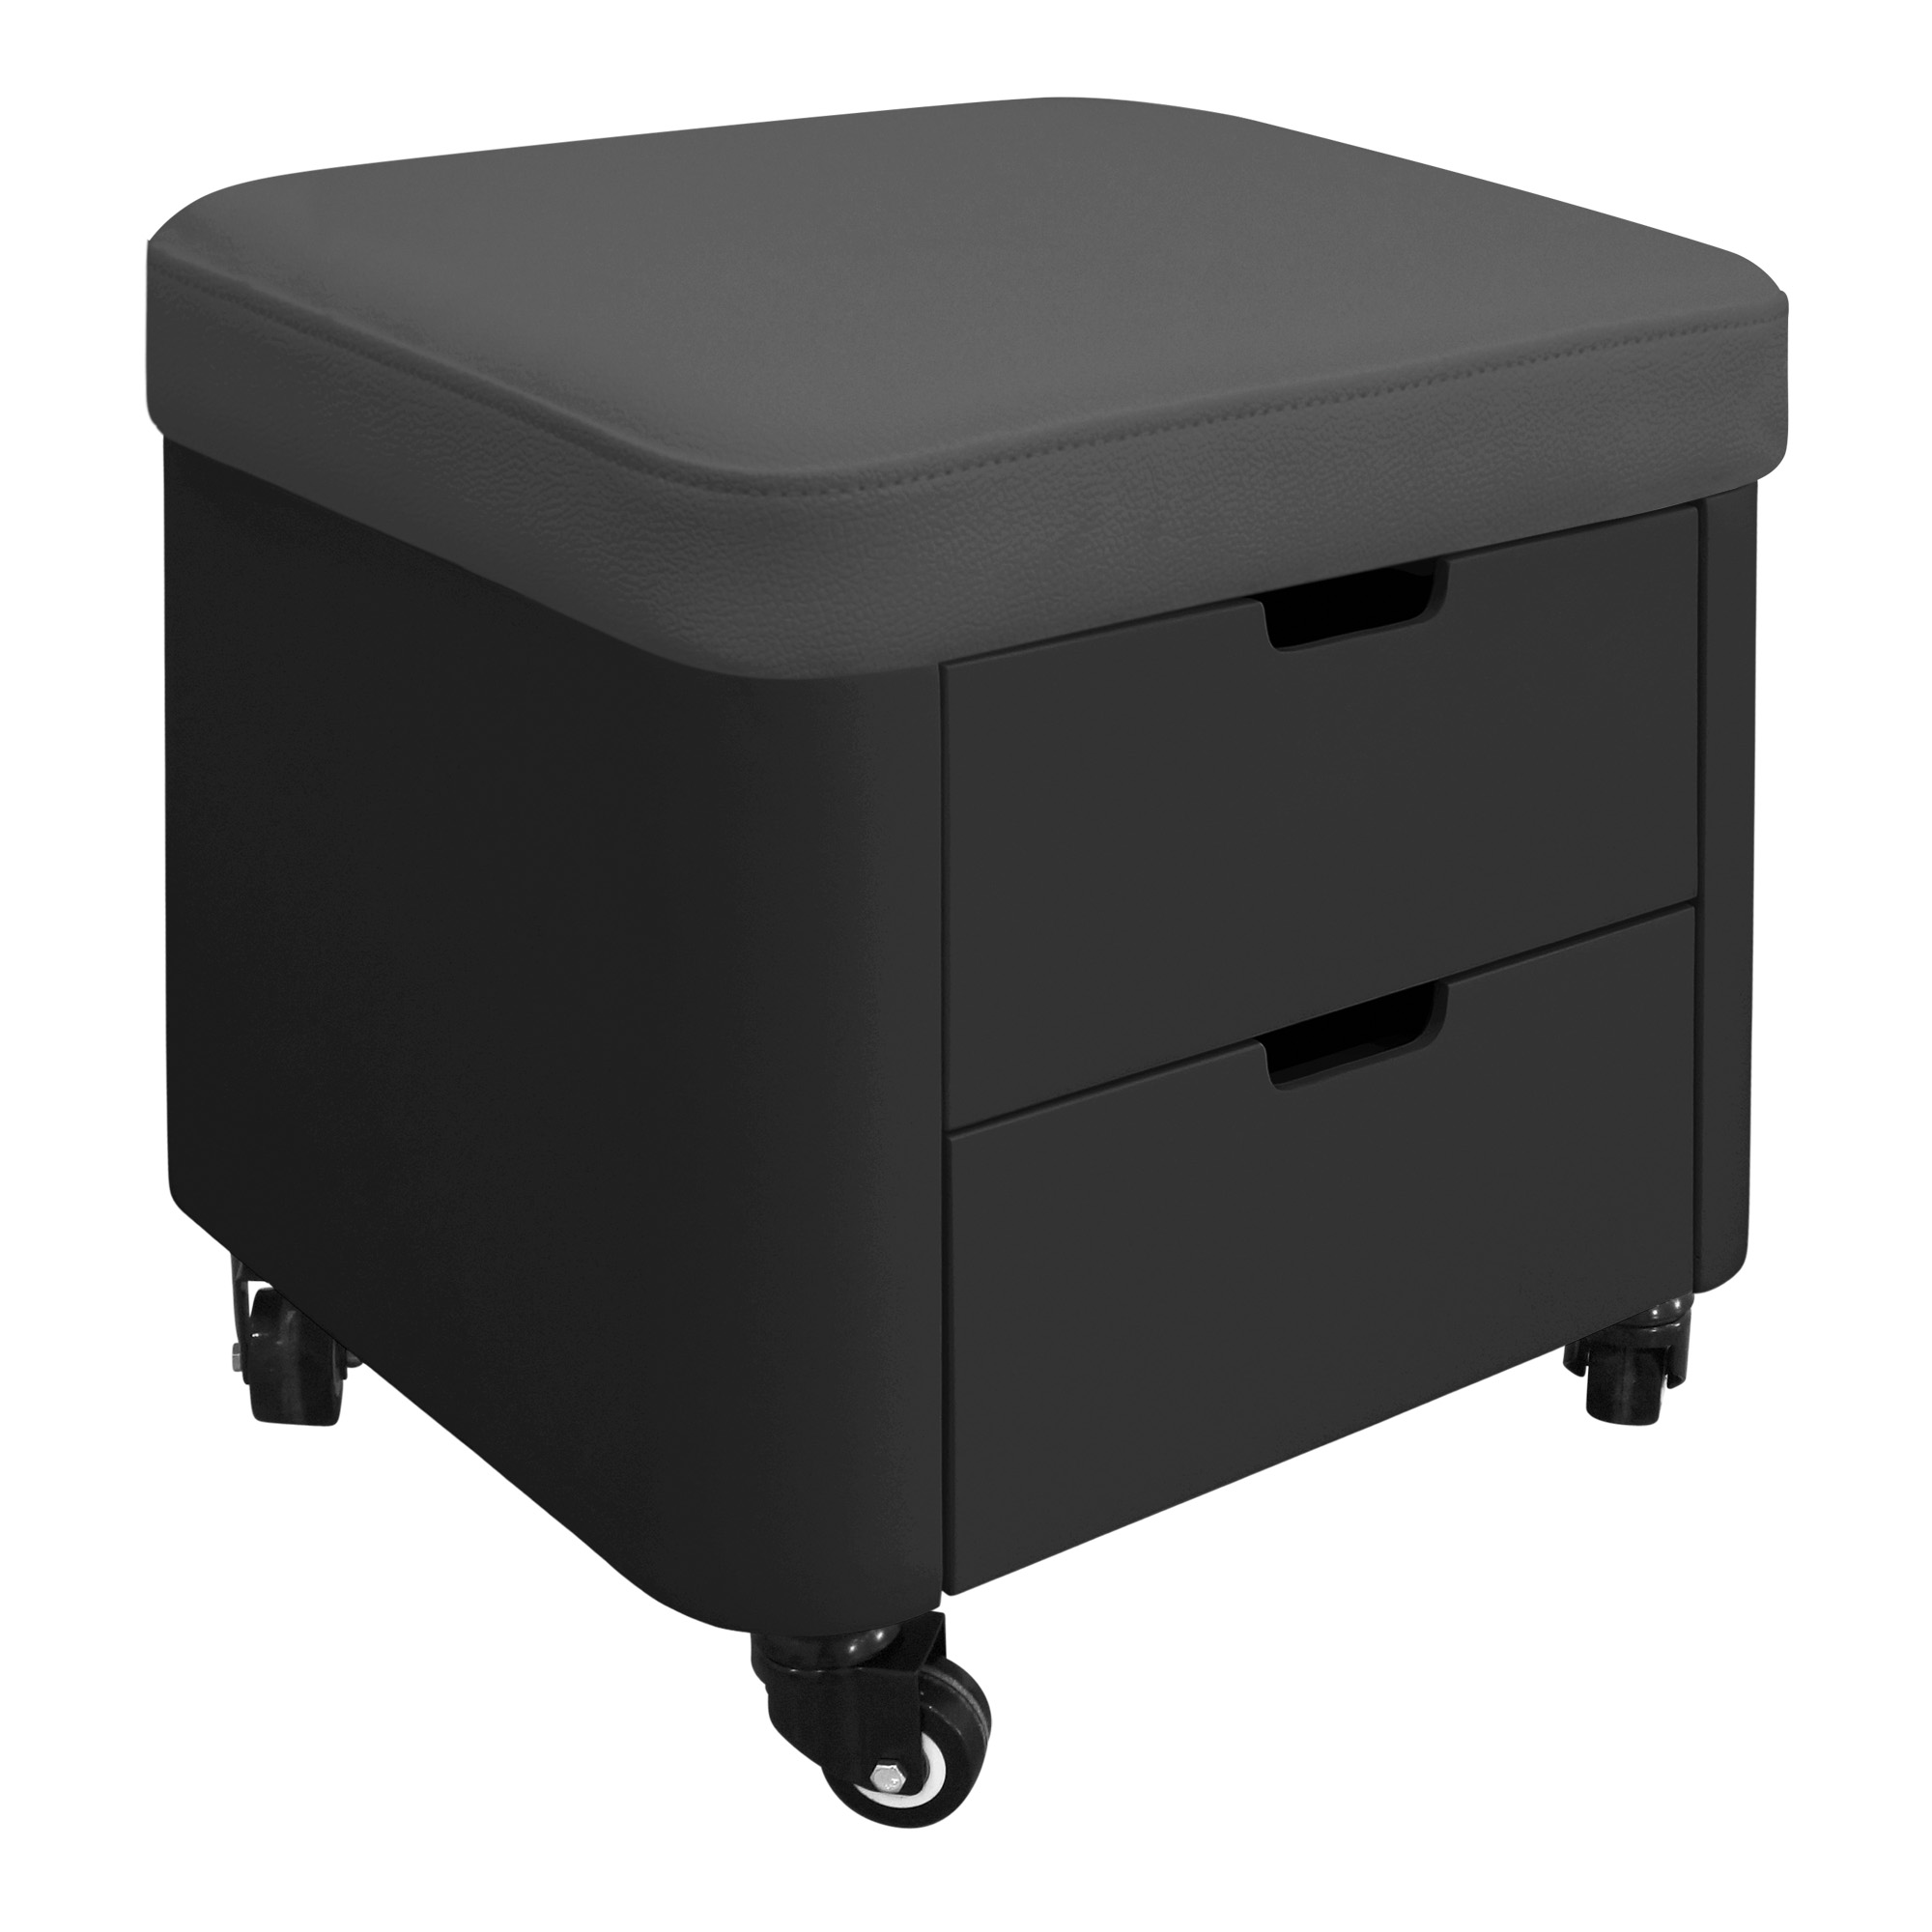 Manicure and pedicure chair with 2 drawers black